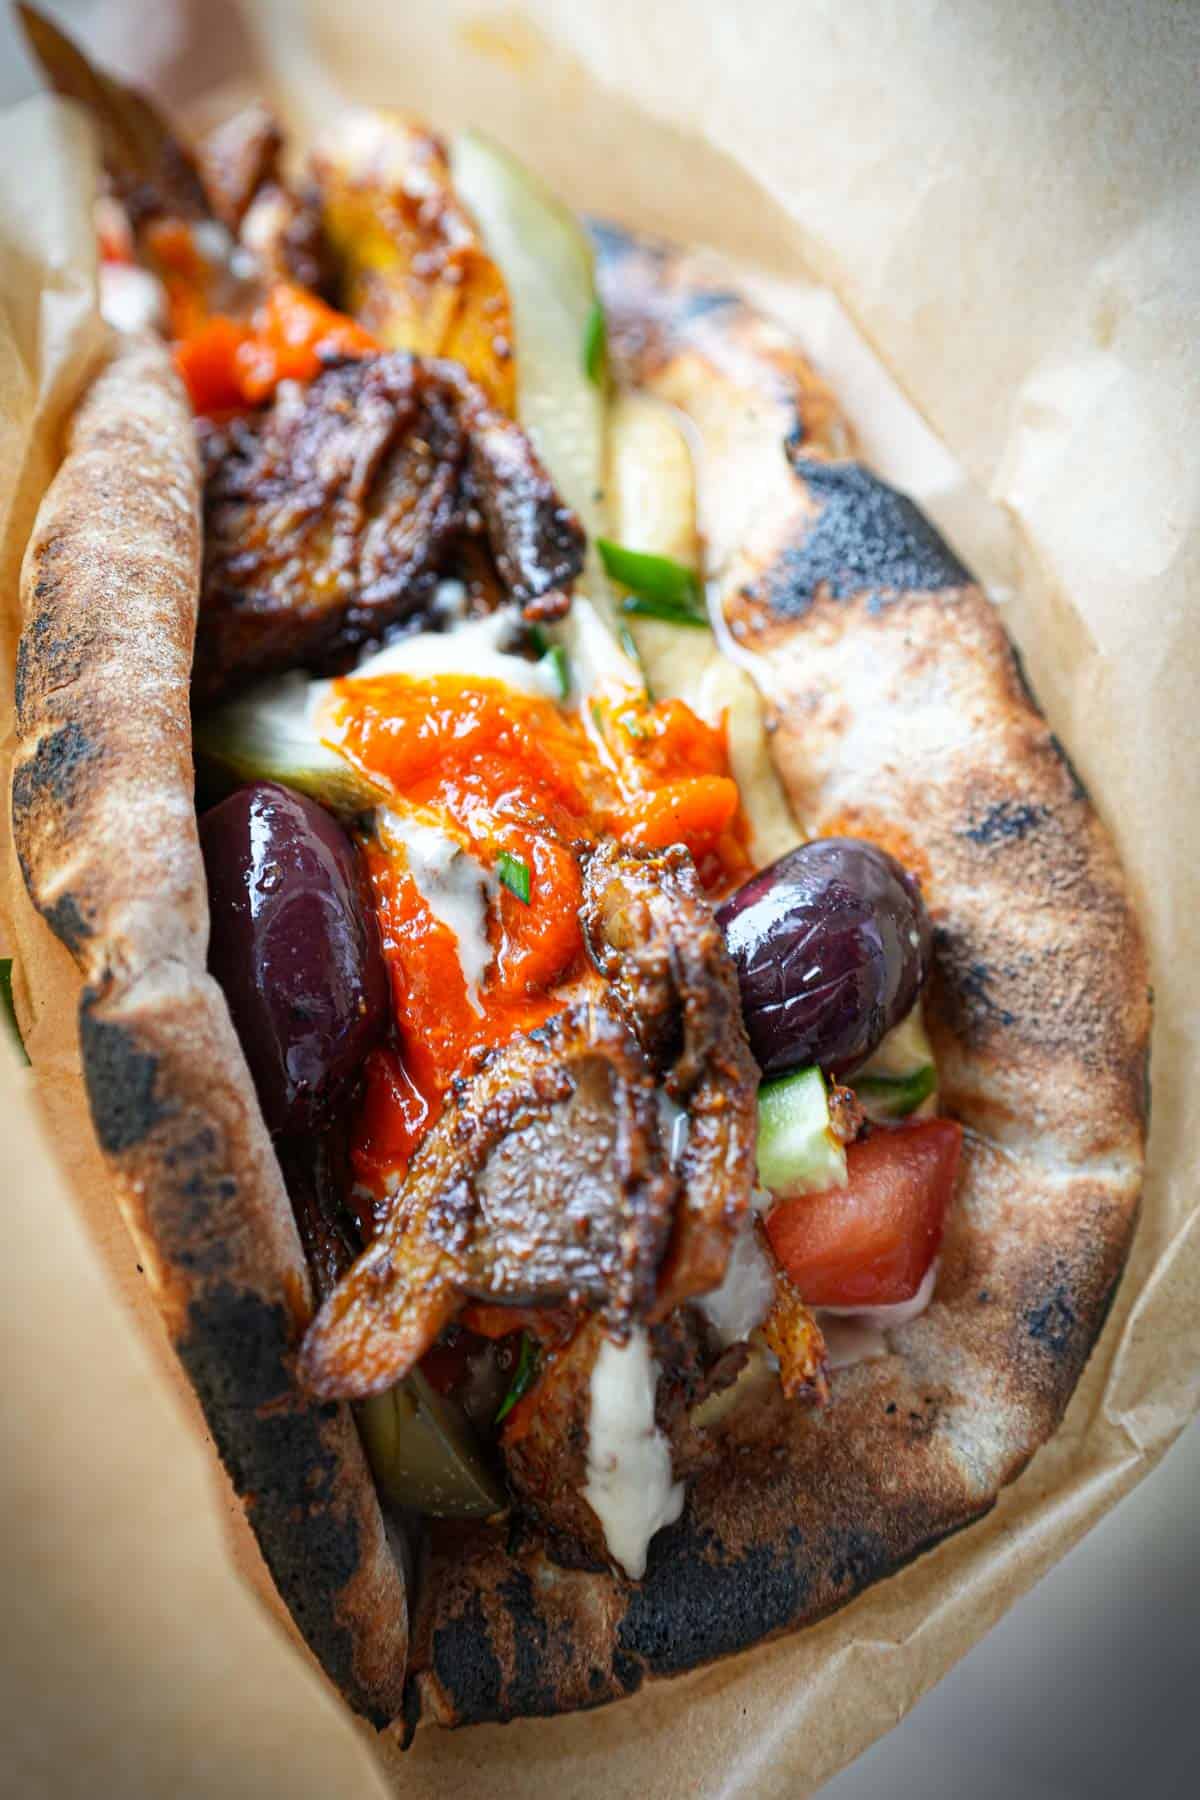 Vegan Shawarma Sandwich being held in brown craft paper. You can see the olives and sauce glistening in the light.